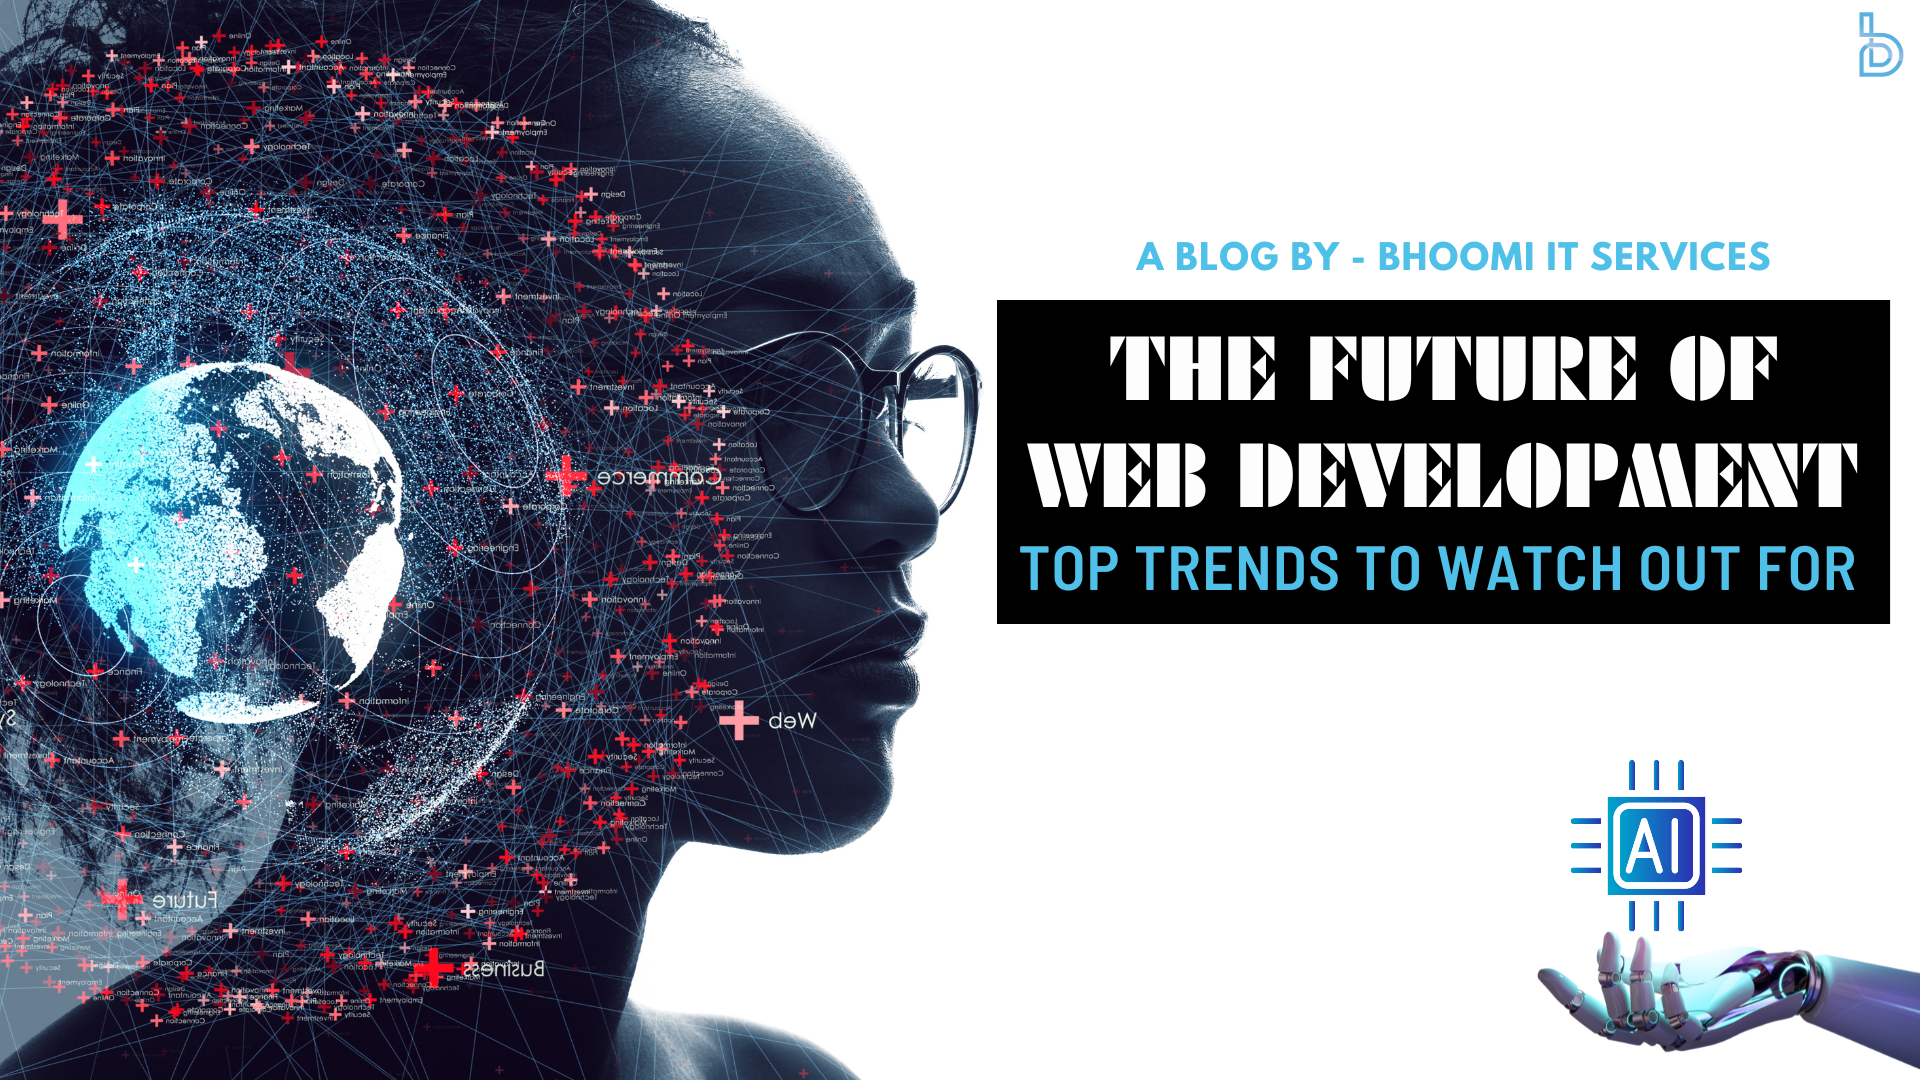 The Future of Web Development: Top Trends to Watch Out For